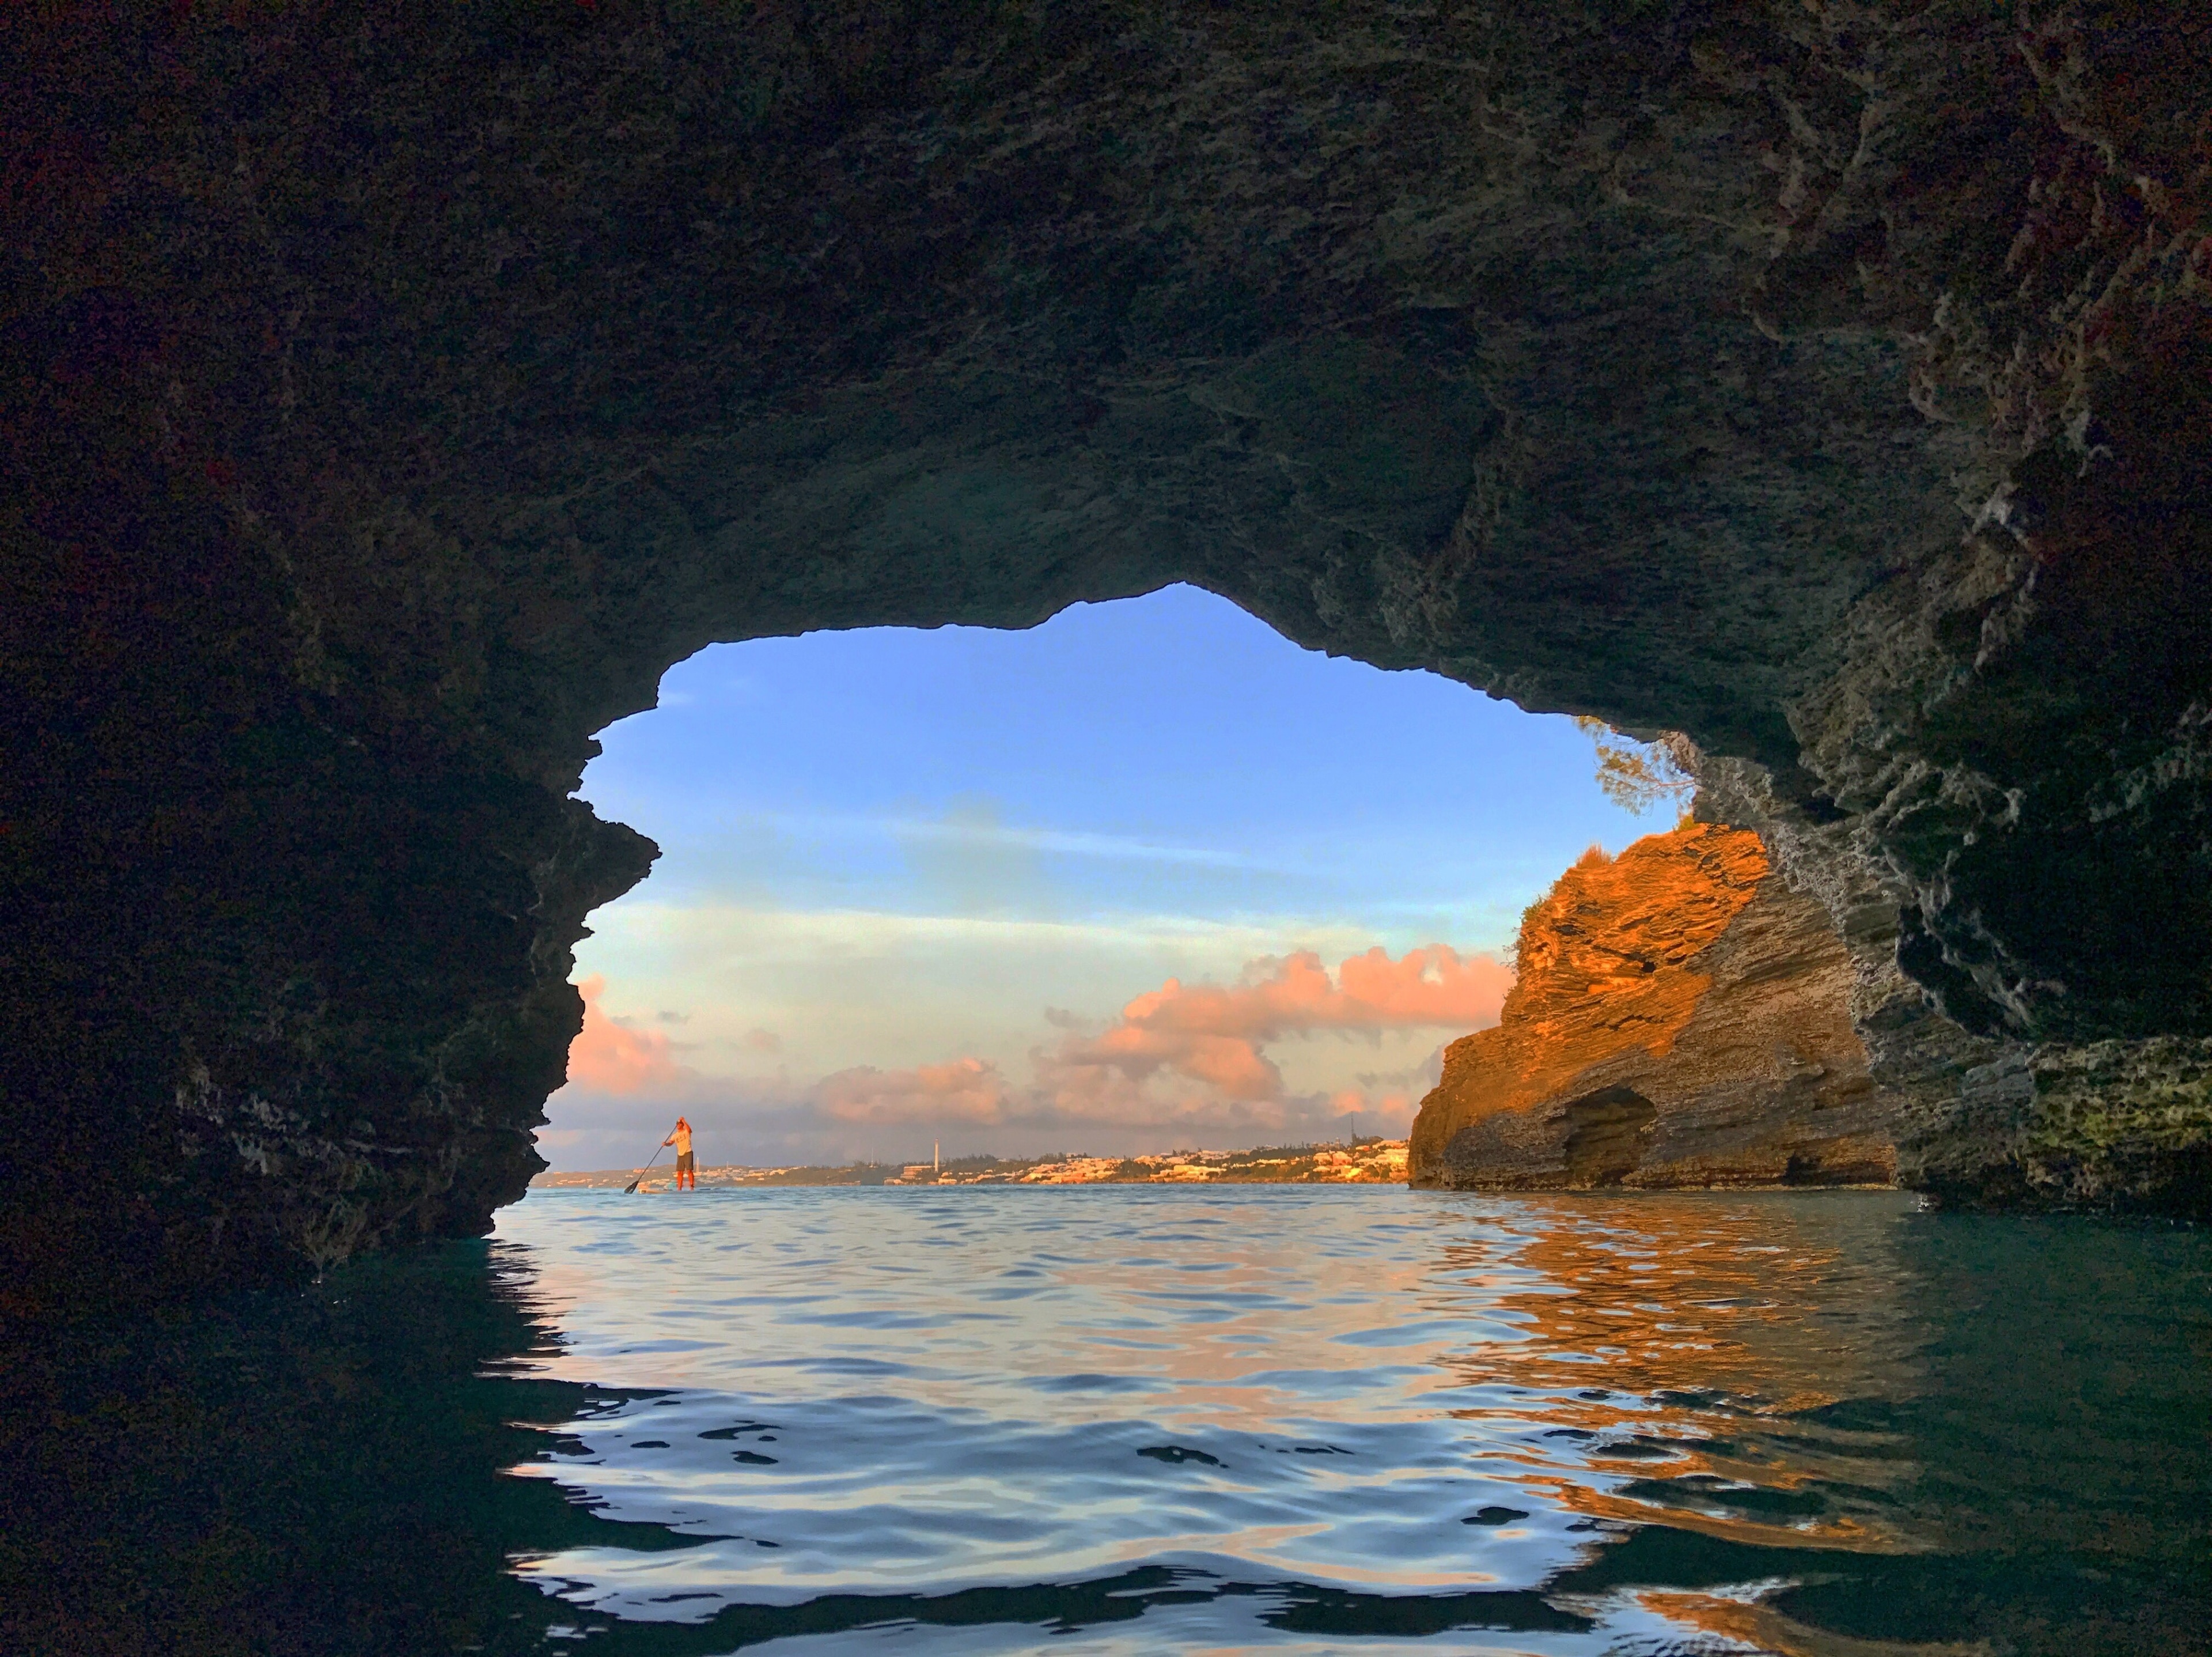 I snapped this picture while I was swimming in some of the caves at Admiralty House at sunset while volunteering in Bermuda. It is an incredible local spot to be at sunset, and it truly captures the the beauty of Bermuda! #Adventure